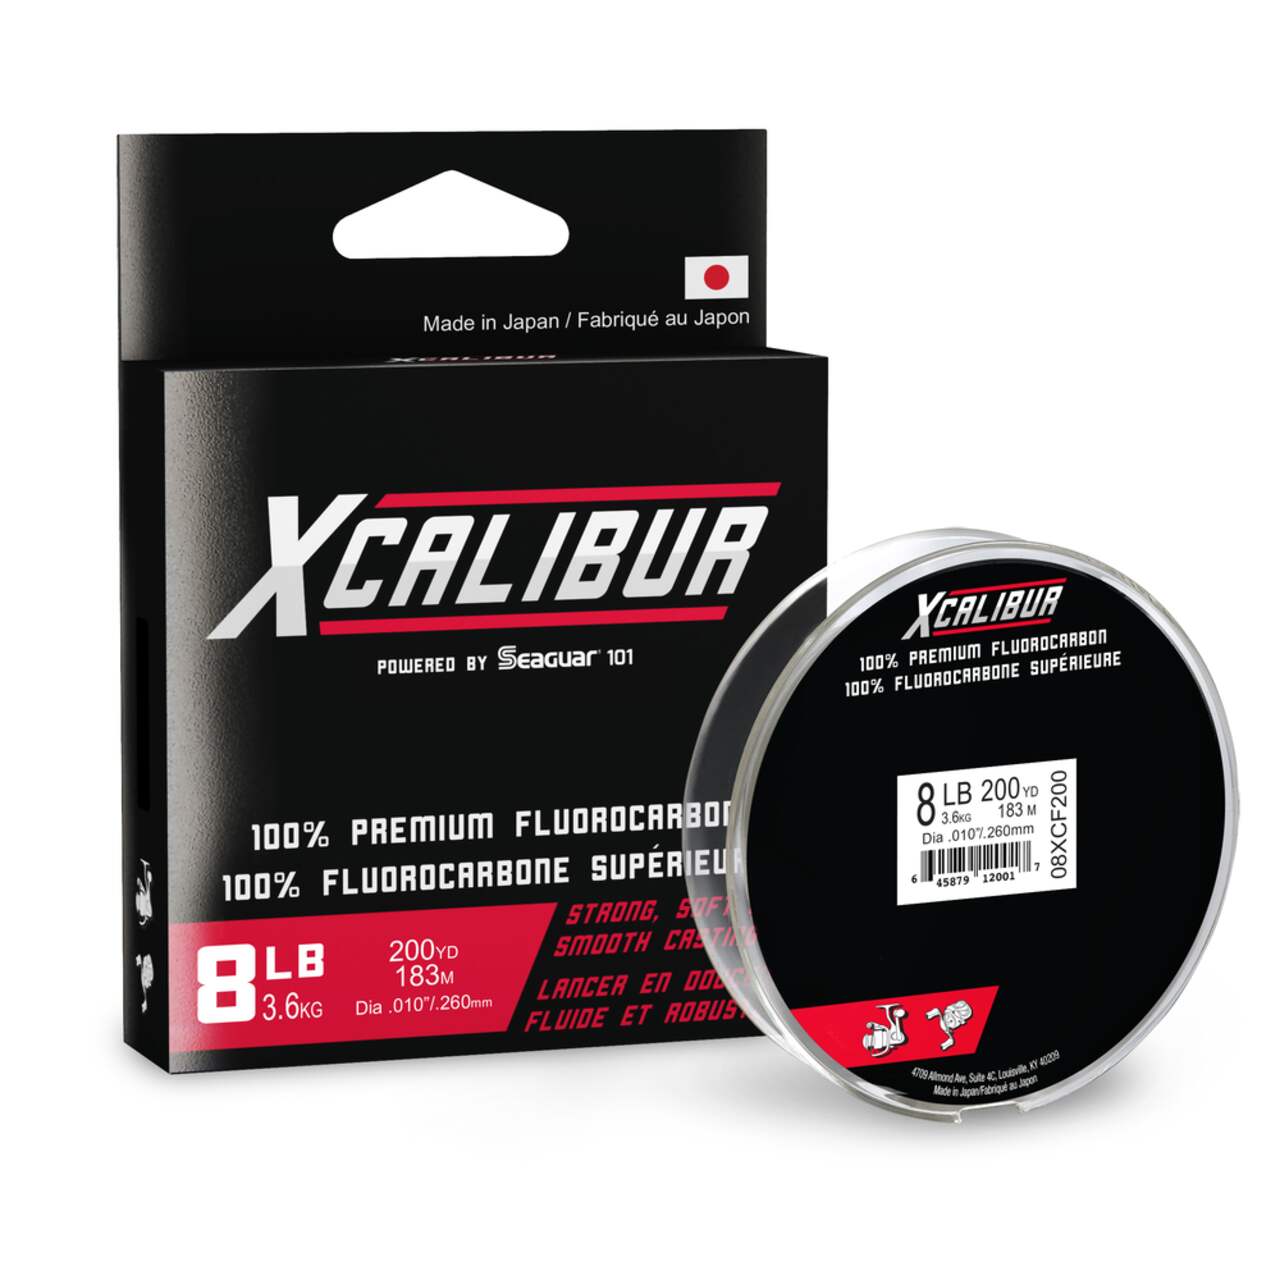 Xcalibur Fluorocarbon Fishing Line, Clear, 200-yds